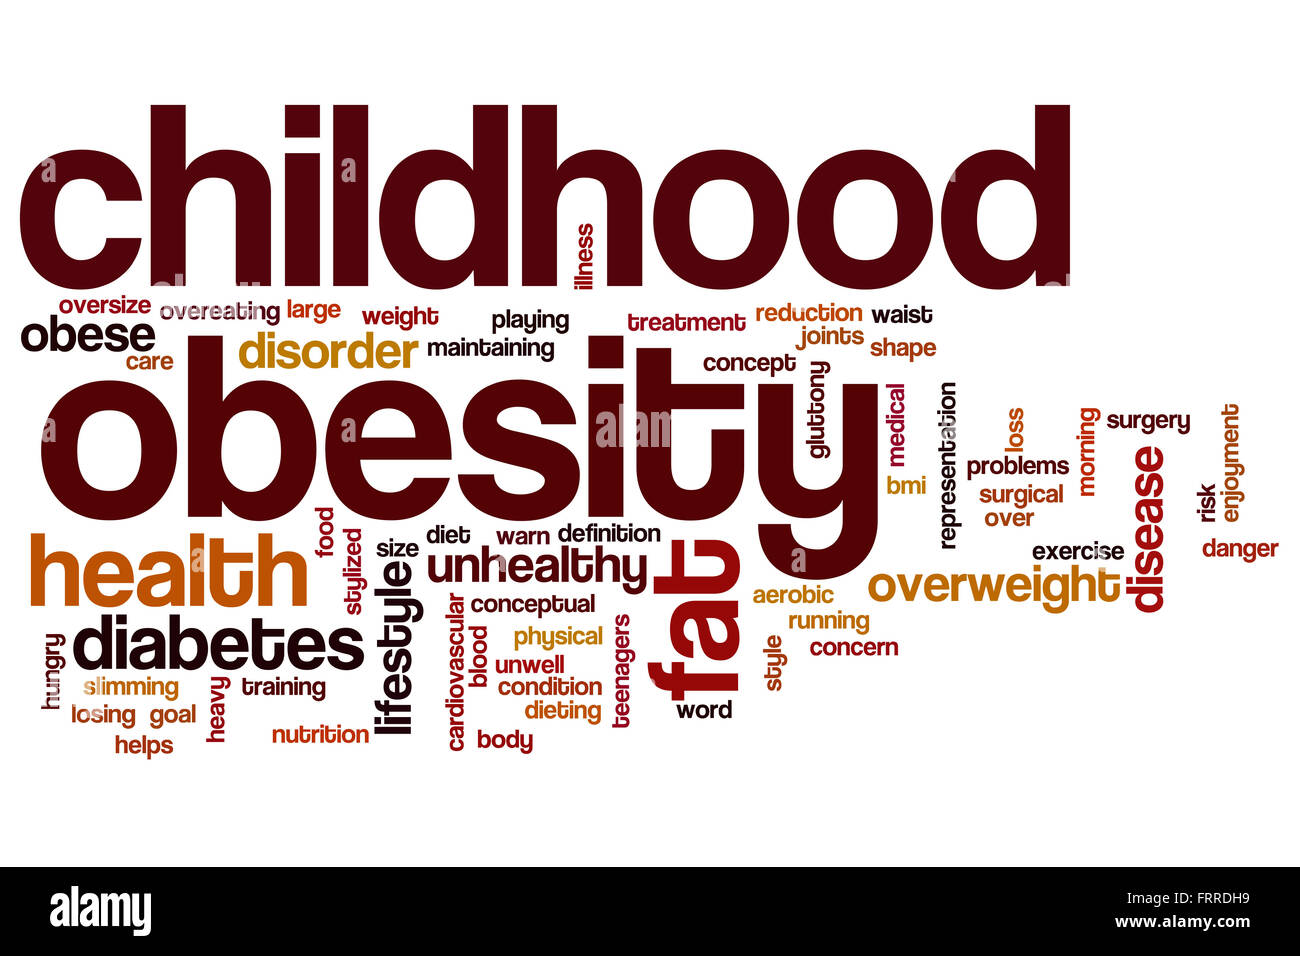 Childhood obesity word cloud concept Stock Photo